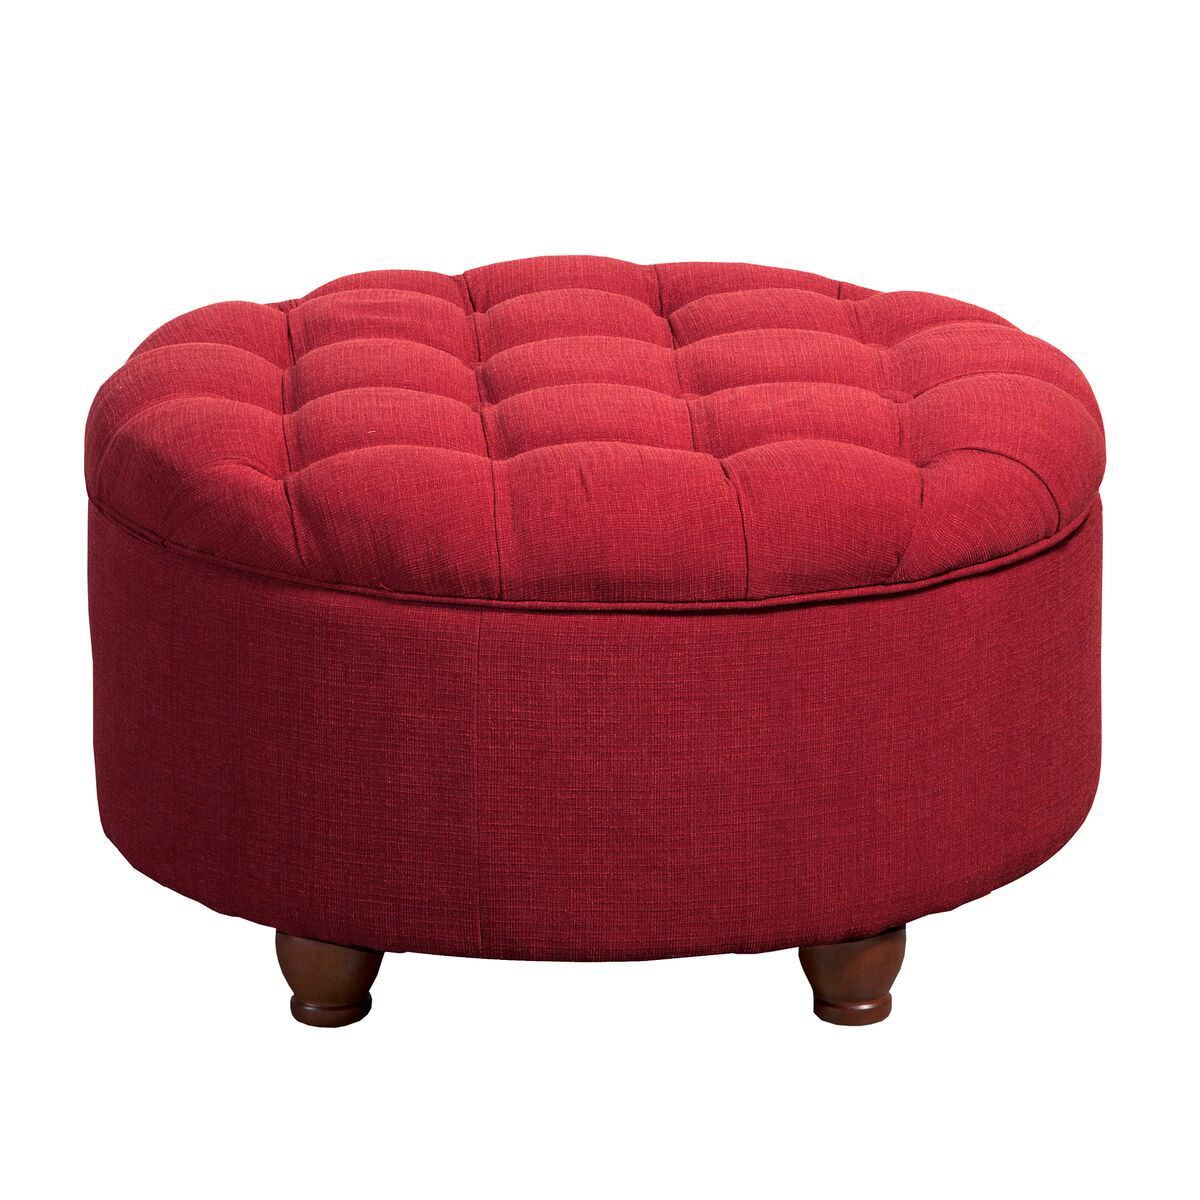 Homepop Tufted Round Cocktail Storage Ottoman, Red Textured Fabric Pertaining To Charcoal Fabric Tufted Storage Ottomans (View 16 of 20)